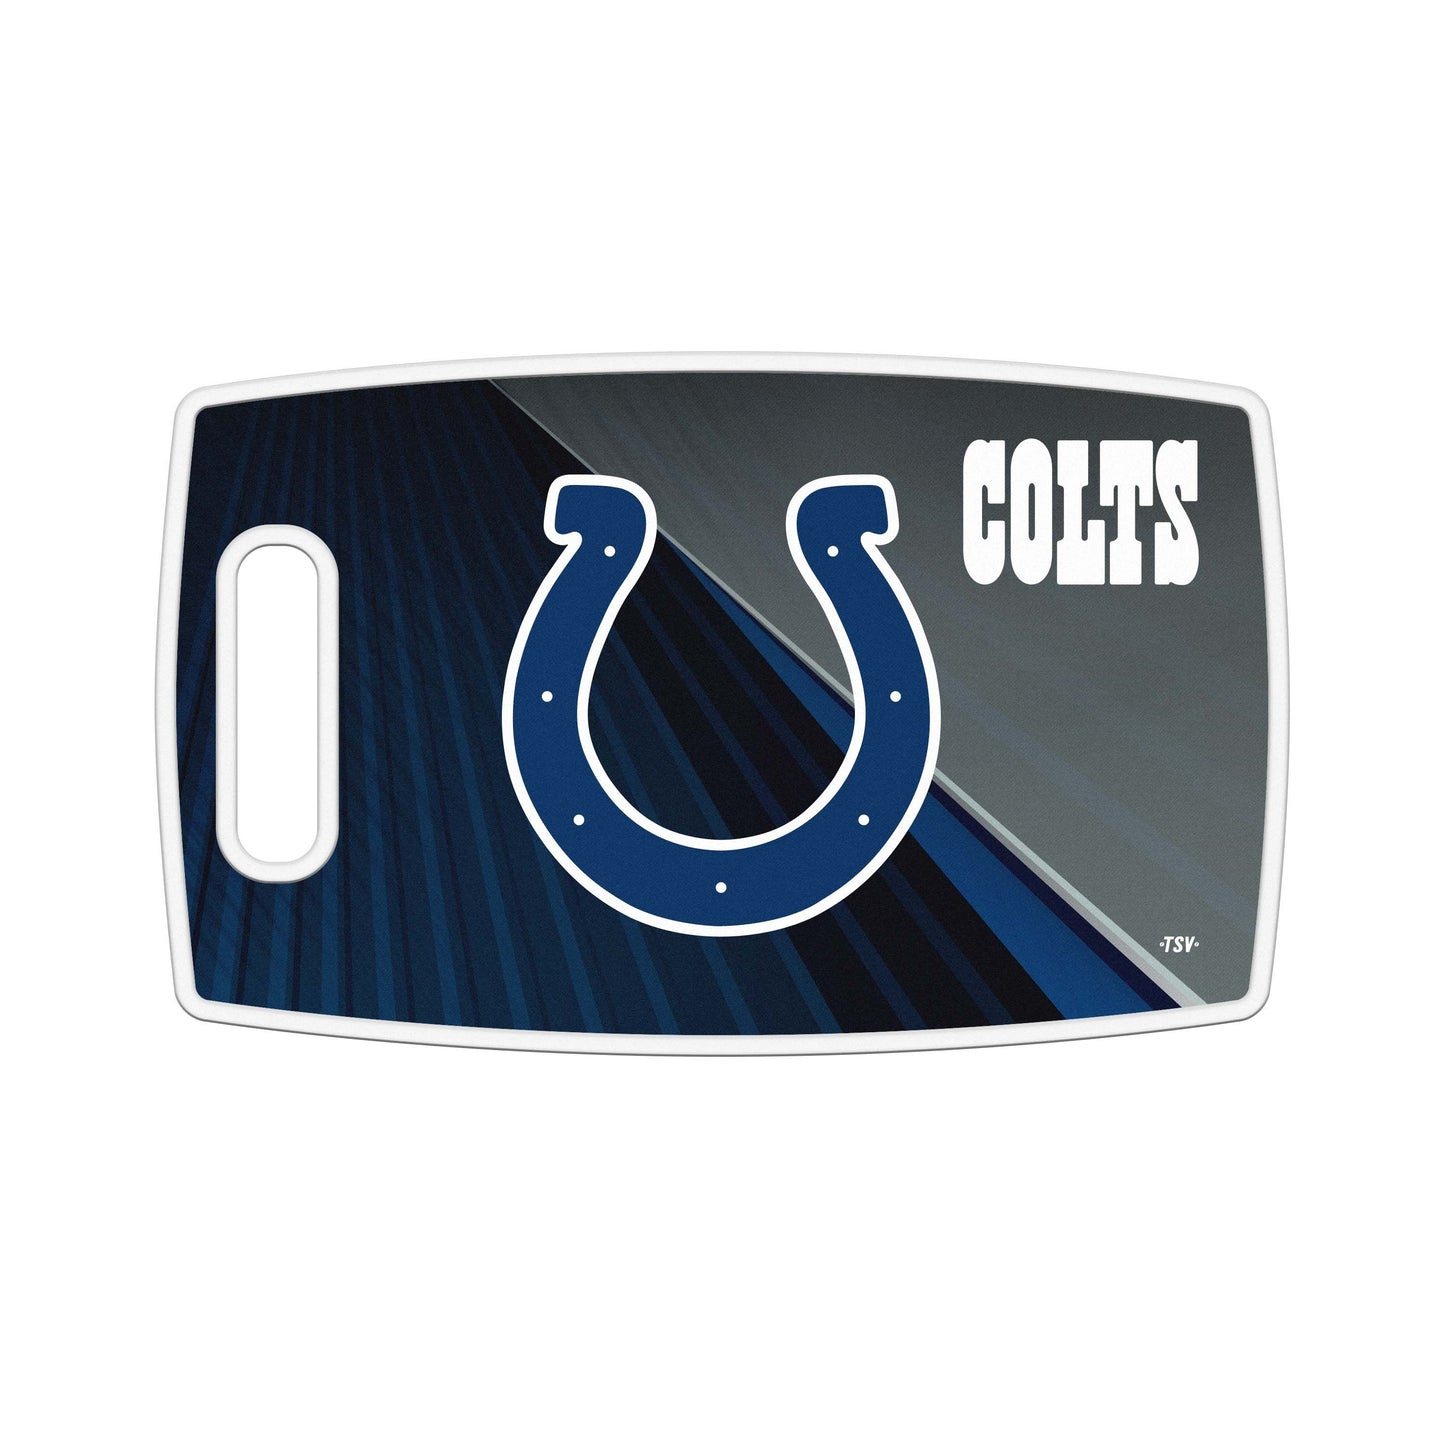 Indianapolis Colts Large 9.5" x 14.5" Cutting Board by Sports Vault